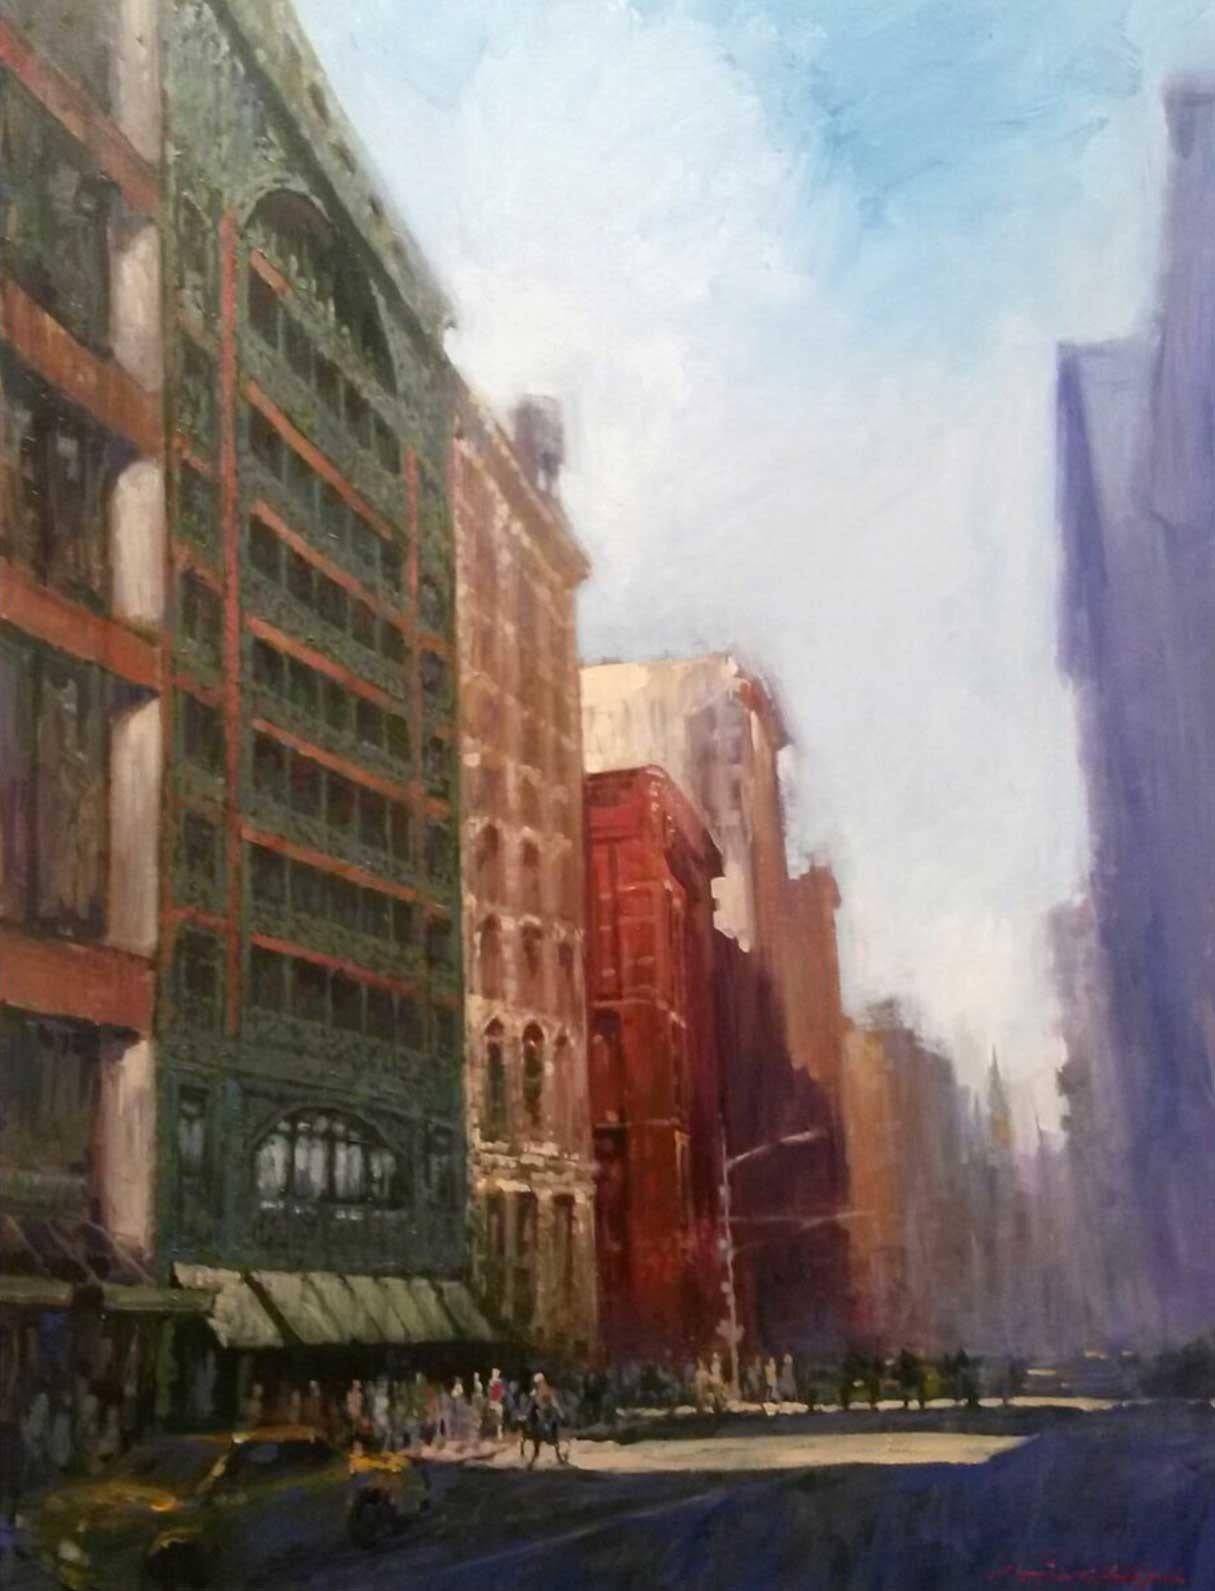 David Hinchliffe Landscape Painting - The Singer Building, Broadway - Scenes of New York: Oil Painting on Canvas